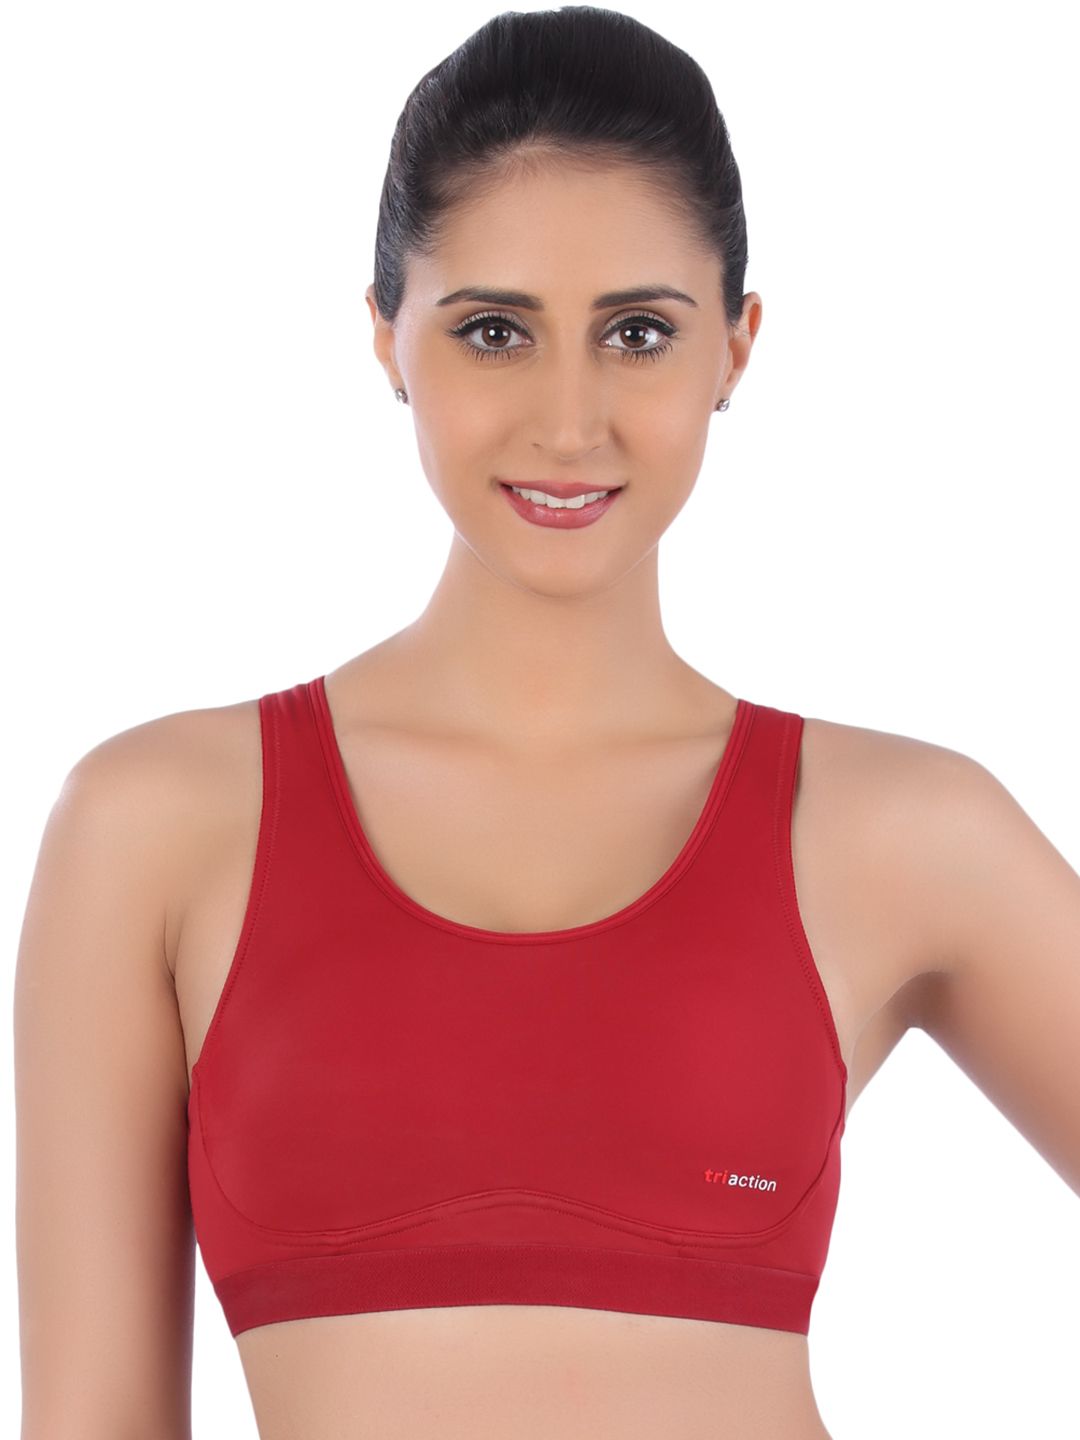 Triumph Triaction 103 Top Triaction Padded Wireless Removable Padded Racer-Back High Bounce Control Sports Bra Price in India